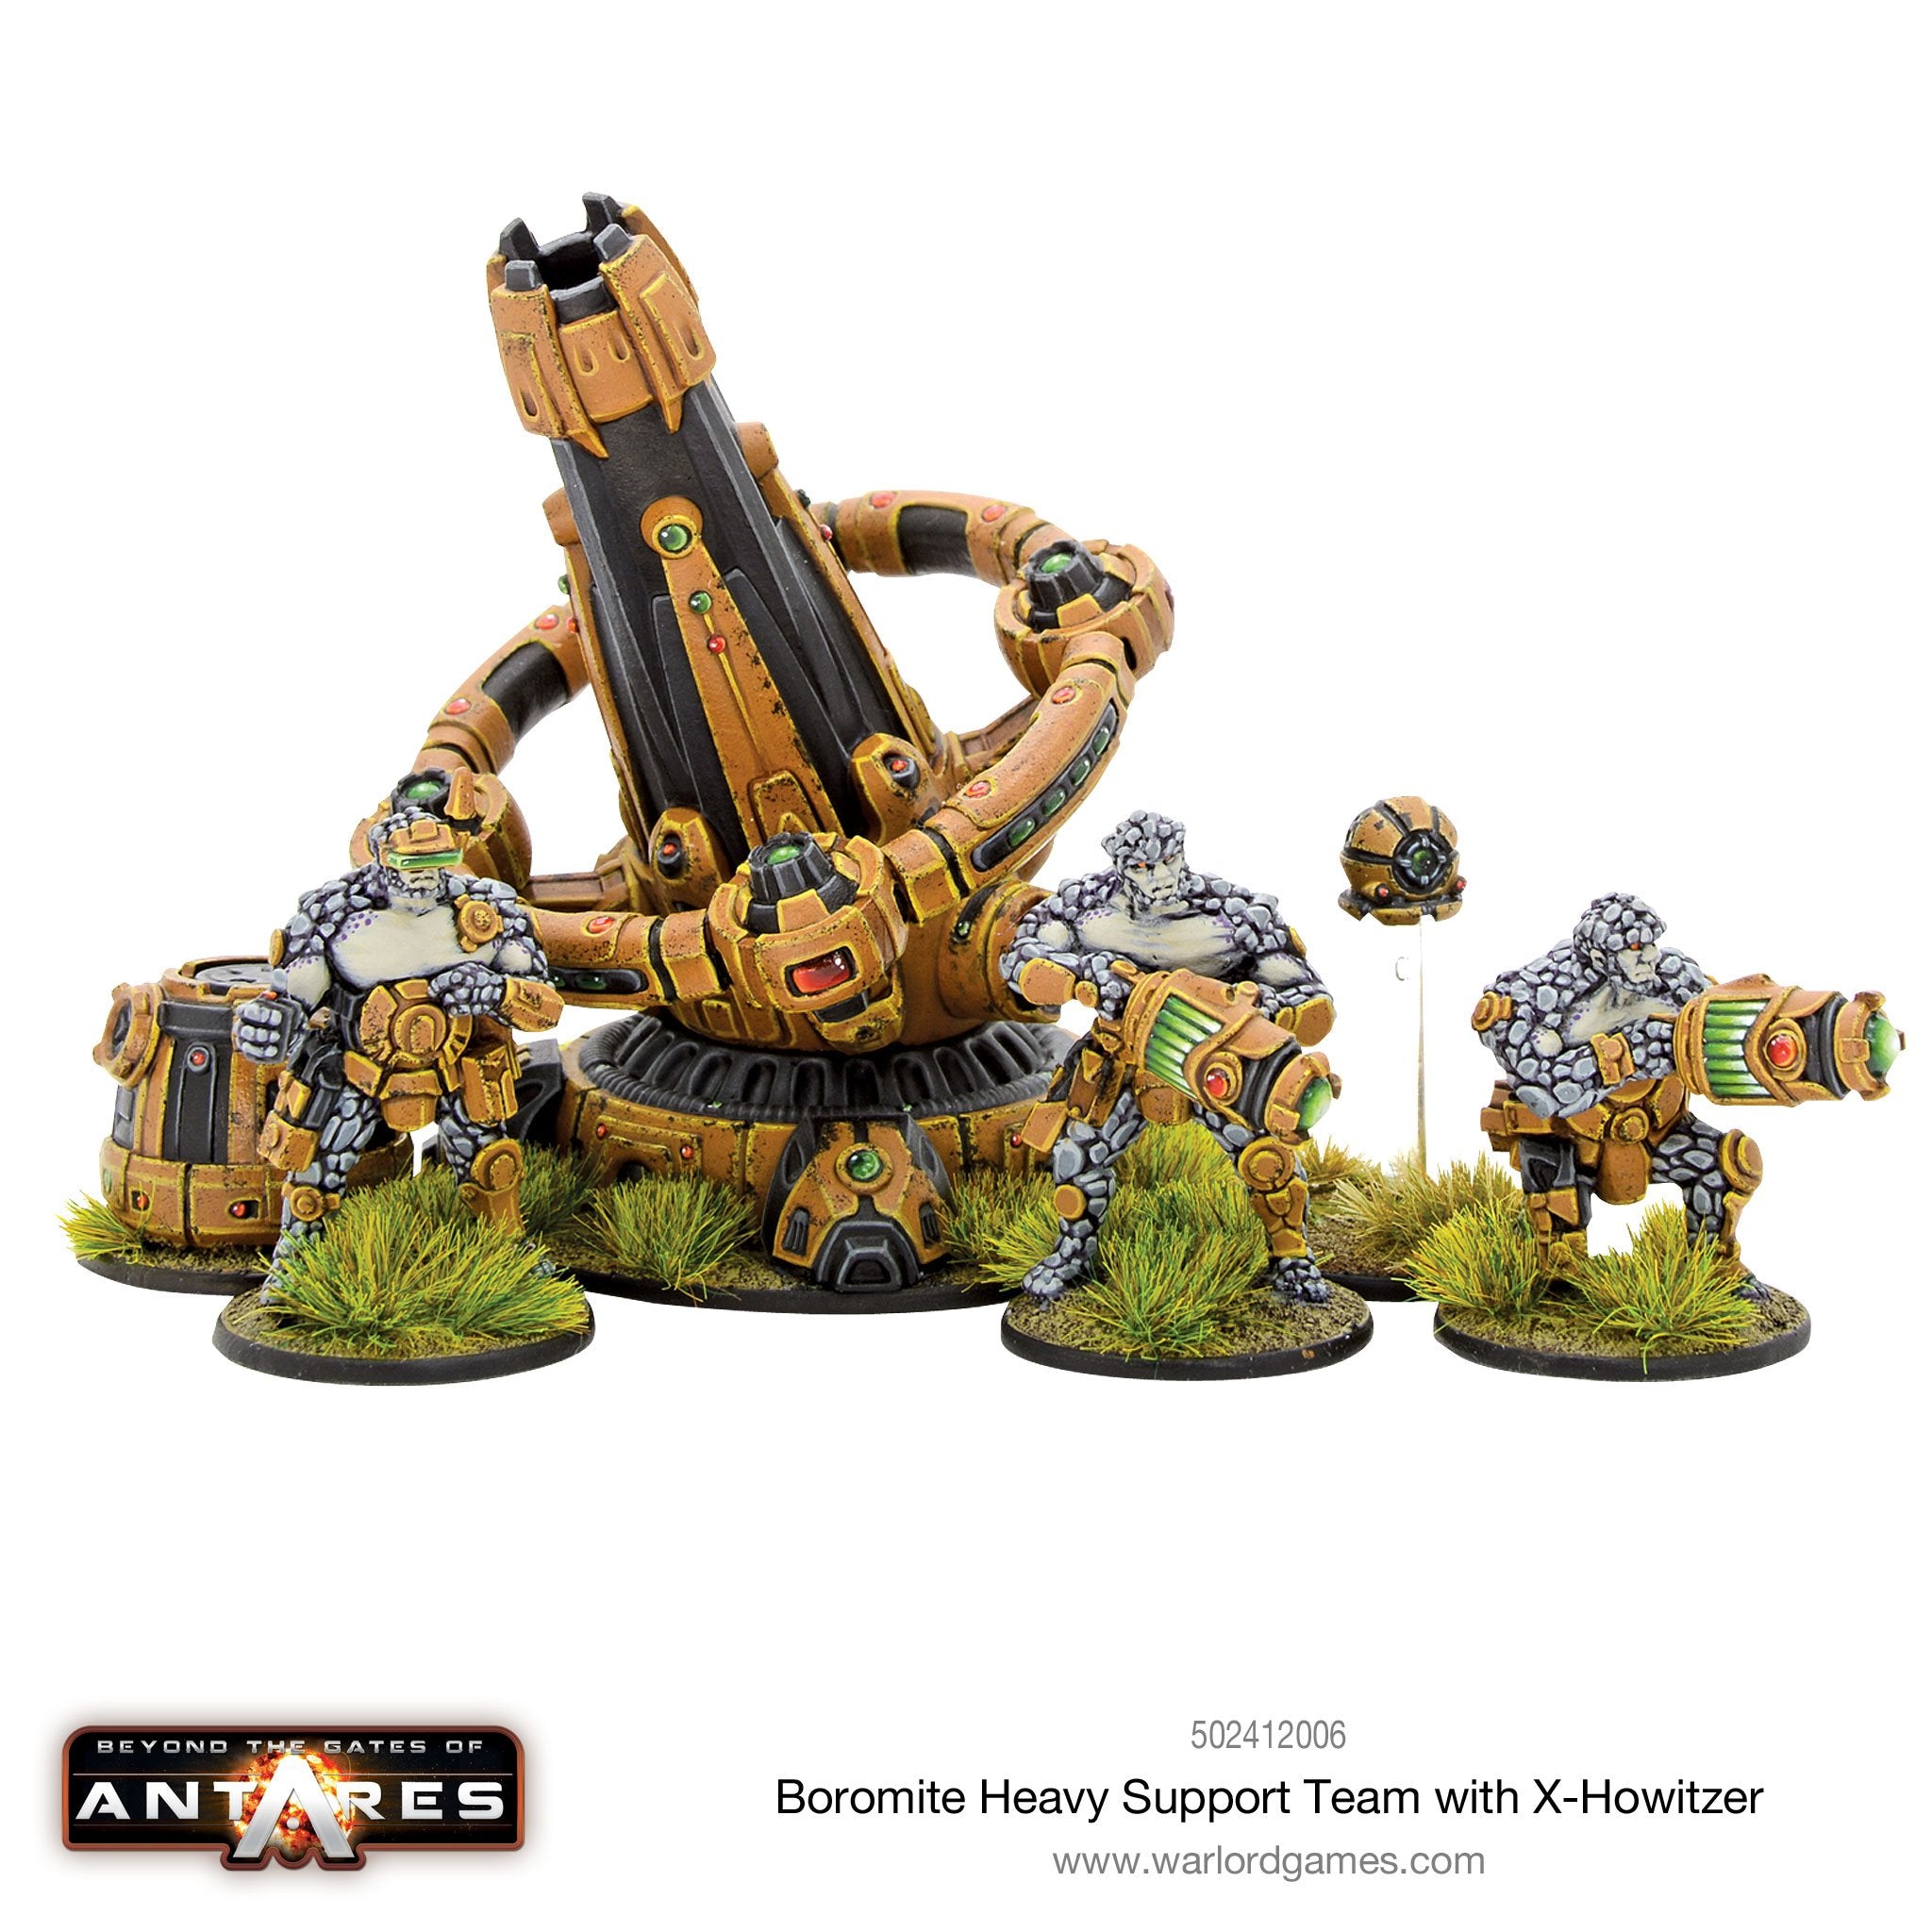 Boromite heavy support team with X-Howitzer